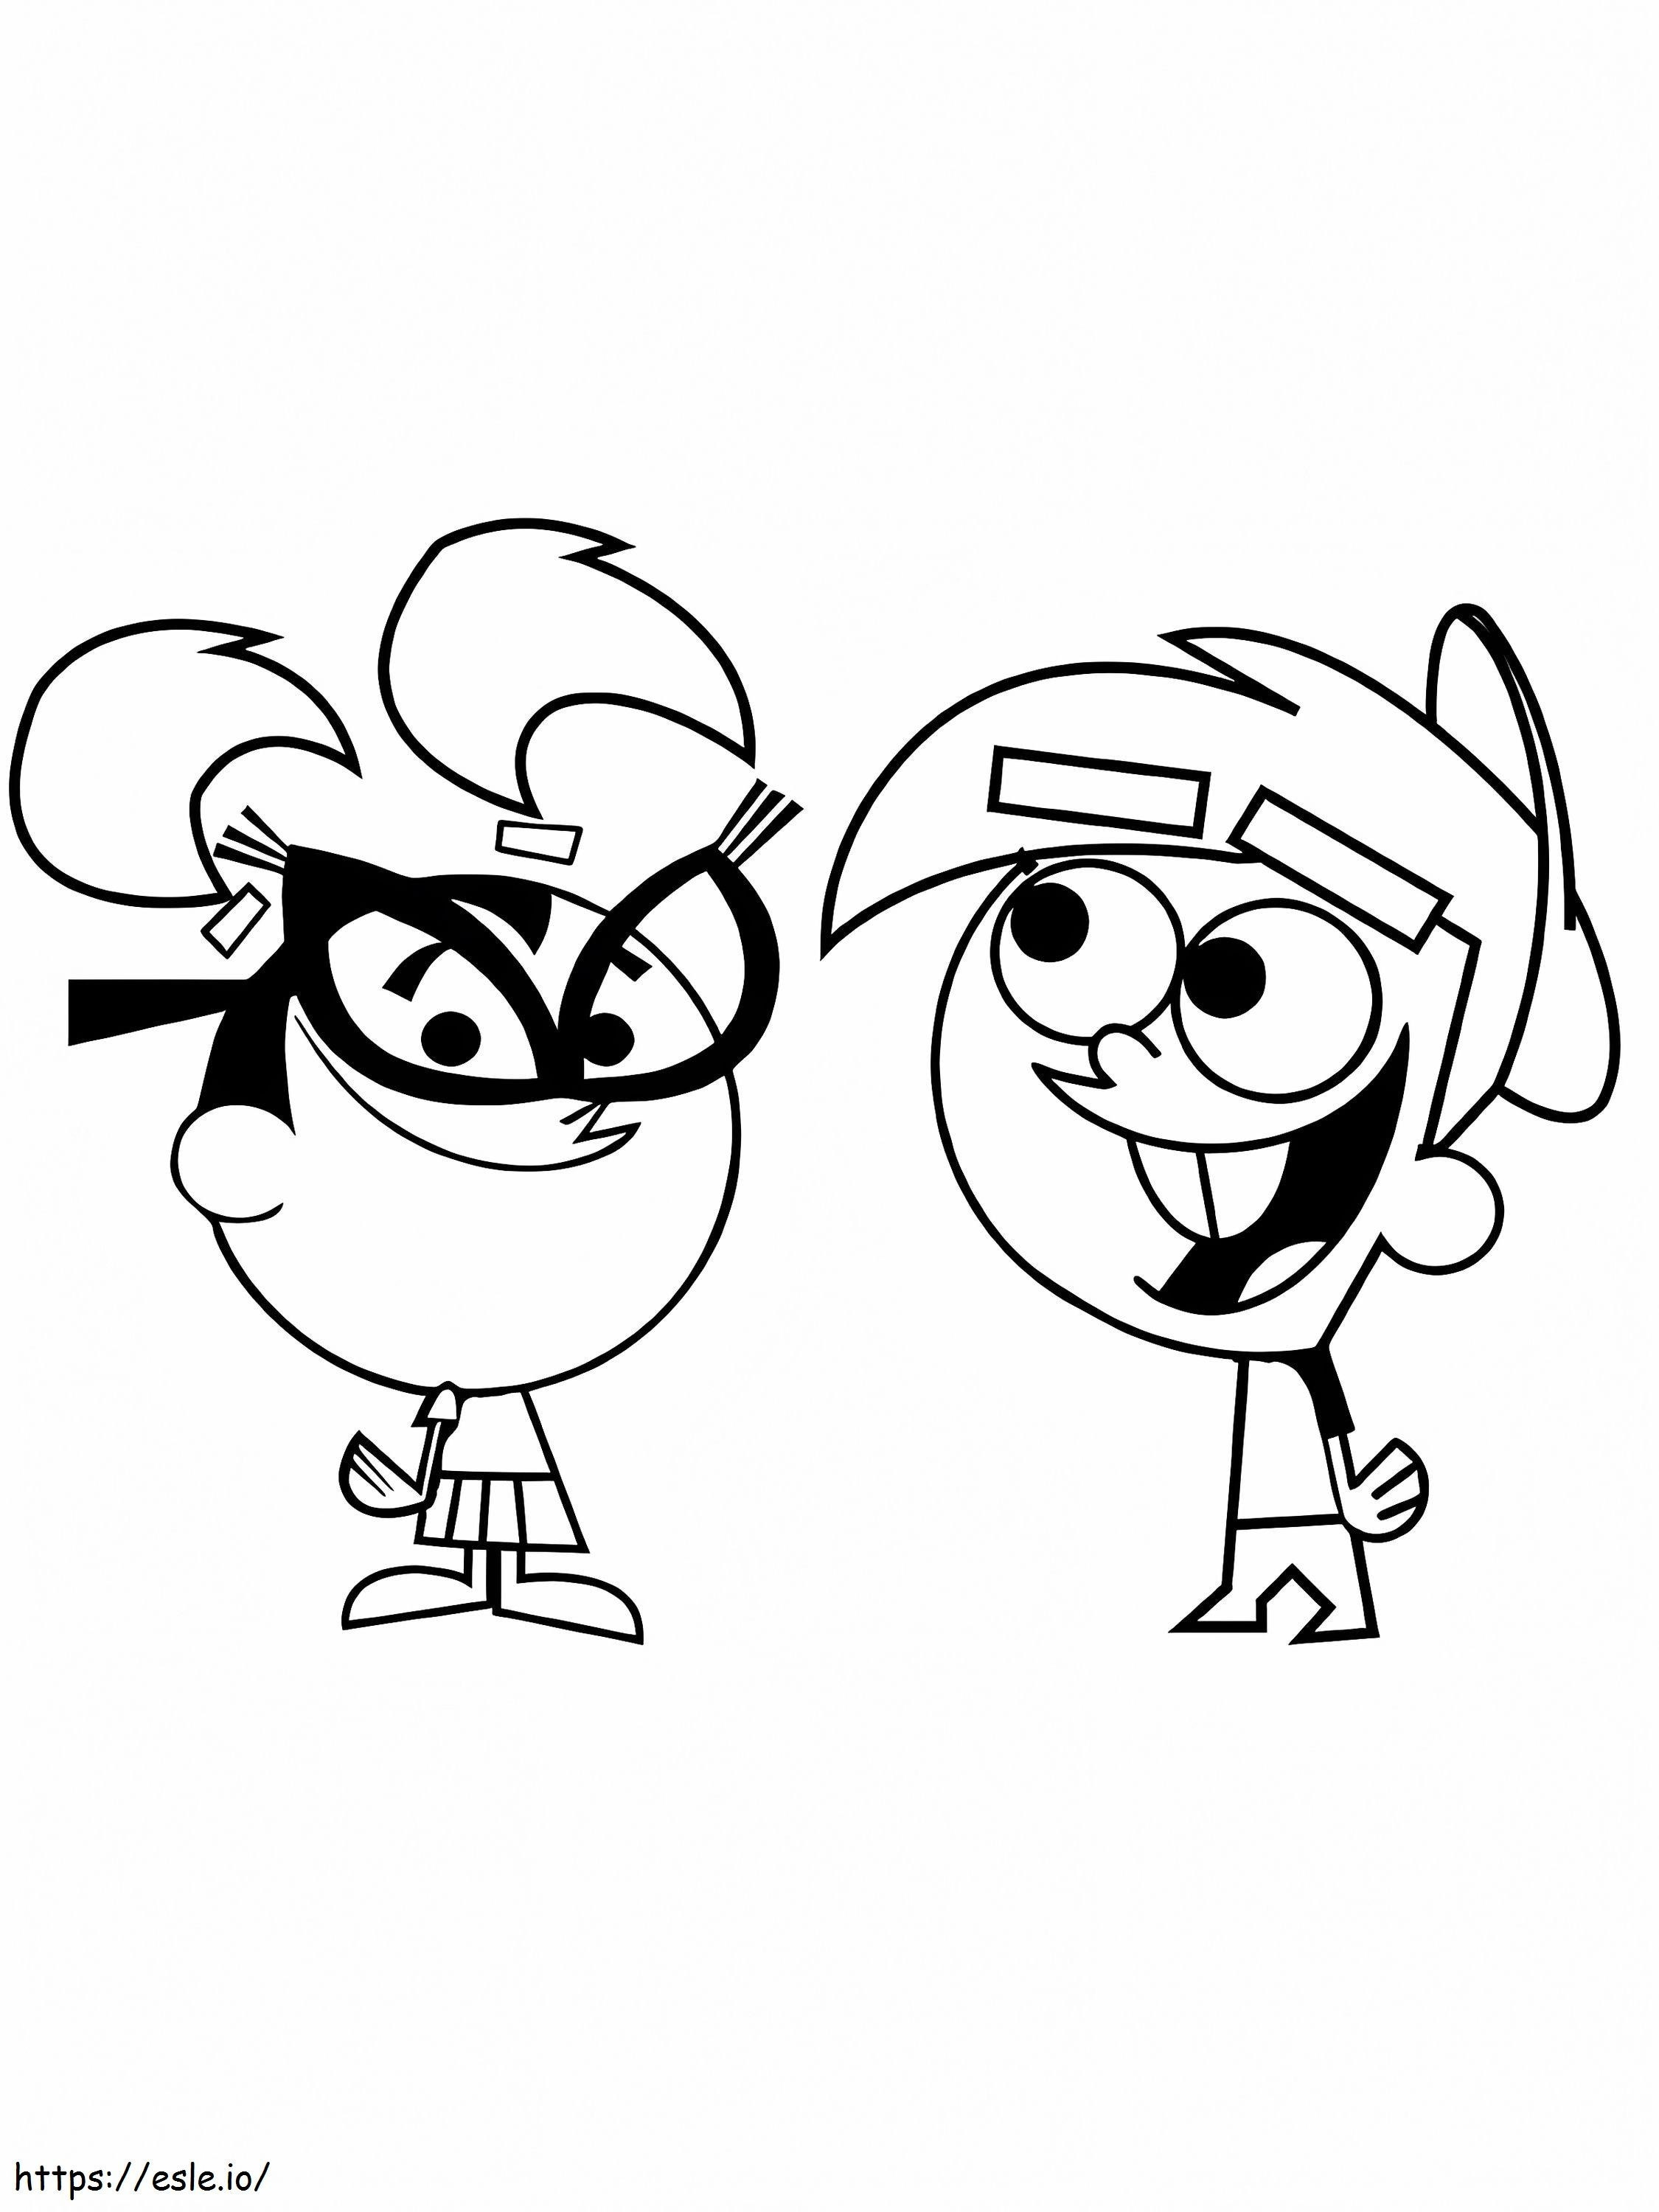 Tootie And Smiling Timmy Turner coloring page